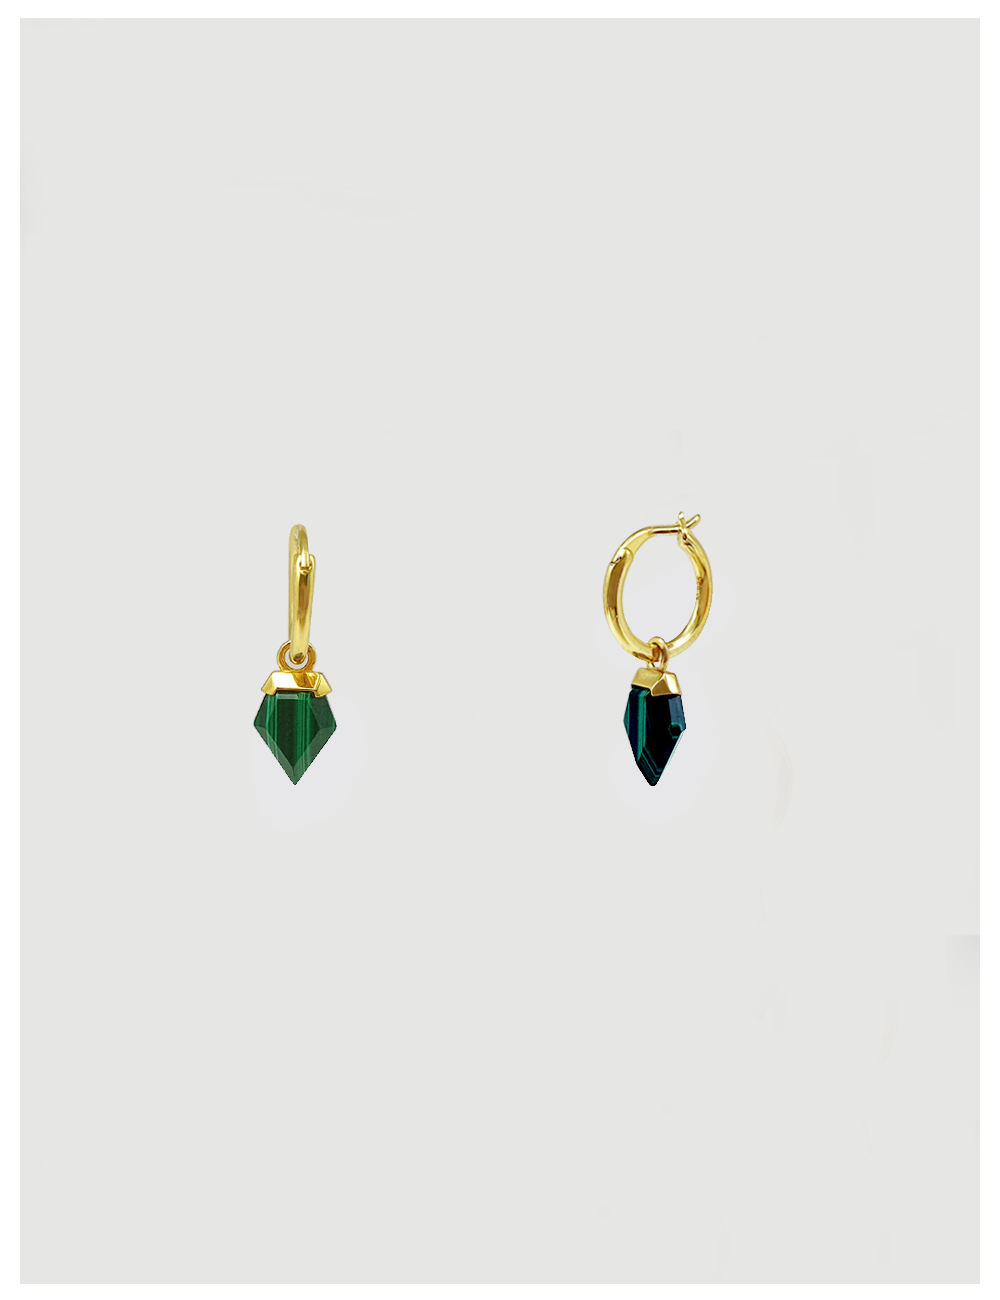 REFIND GREEN Silver Earring(14K Gold도금)